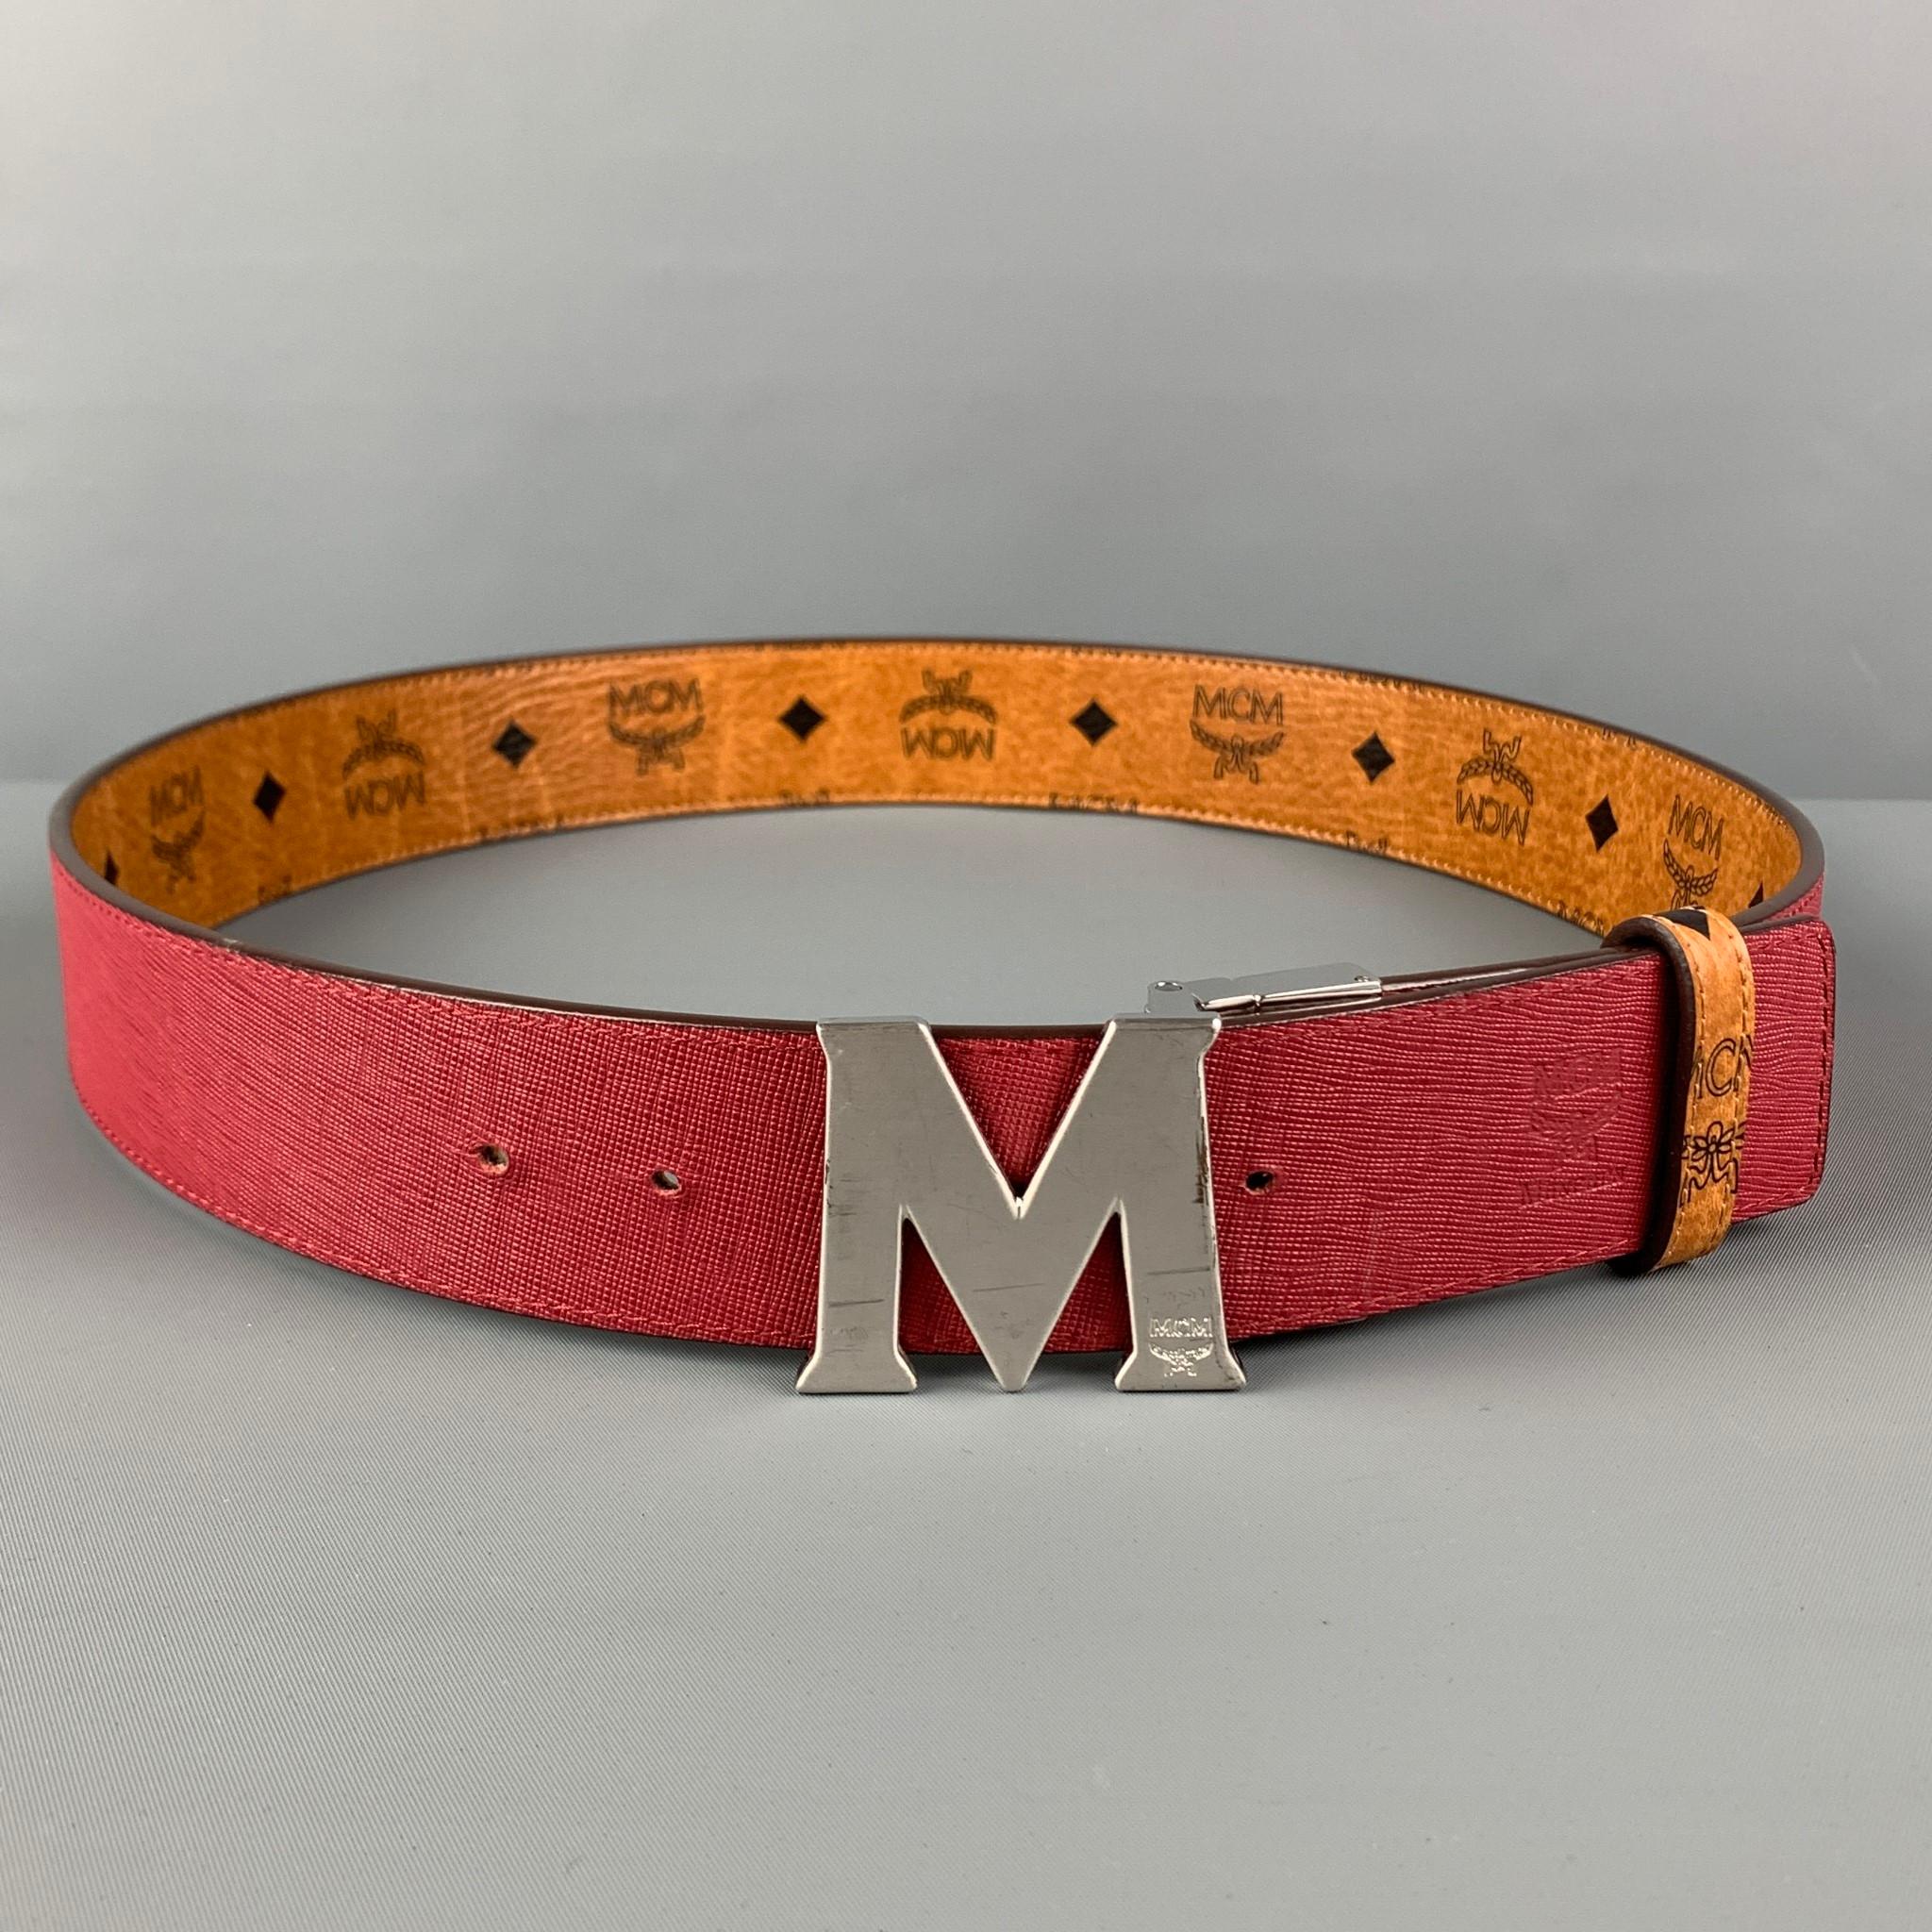 MCM belt comes in a tan & black monogram print leather featuring a burgundy reversible style and a silver tone logo buckle closure. 

Very Good Pre-Owned Condition.

Length: 43 in.
Width: 1.75 in.
Fits: 37 in. - 41 in.
Buckle: 1.75 in. 